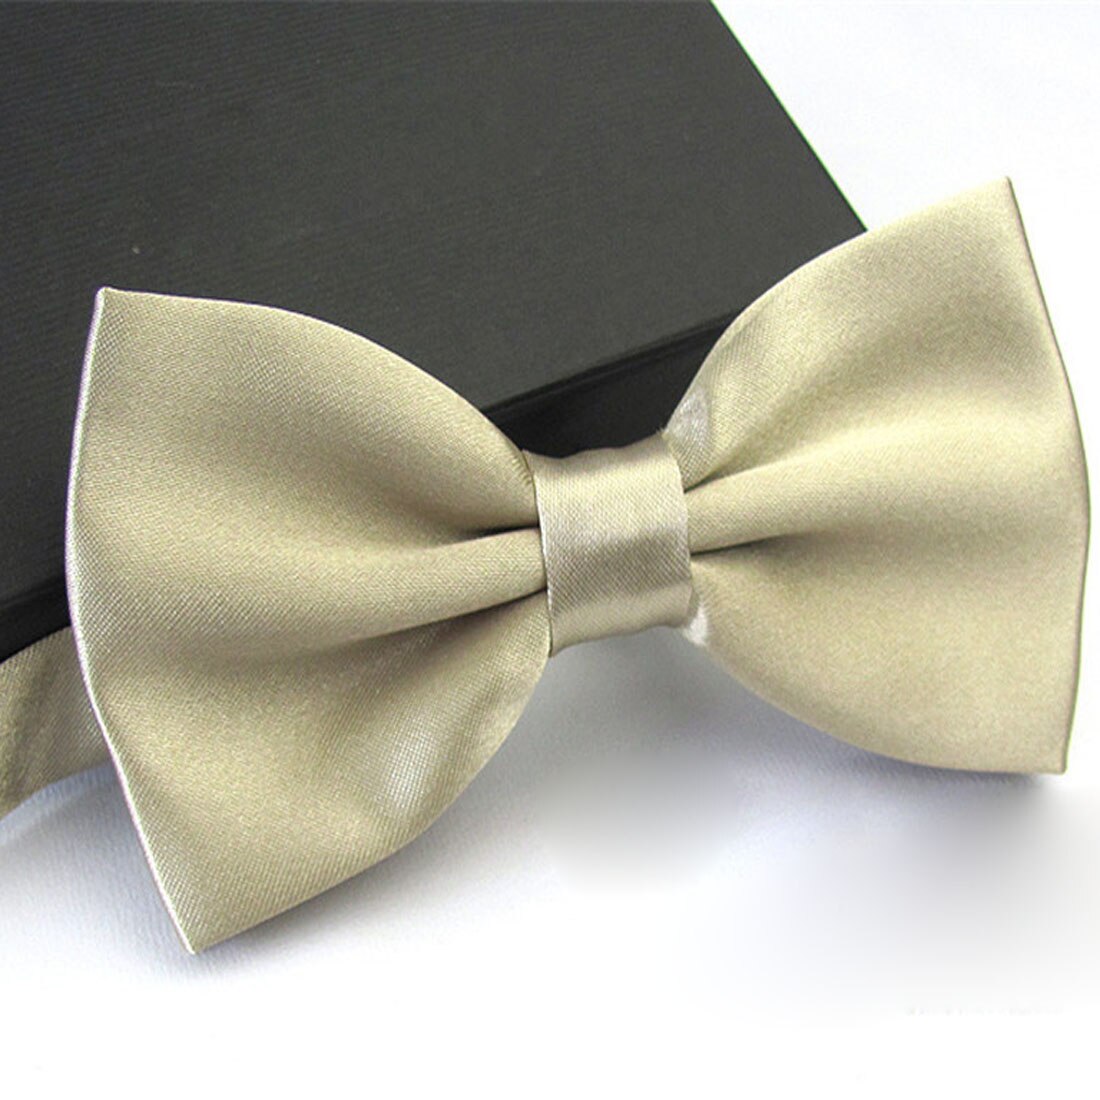 Wedding Men Bowtie Solid Color Business Necktie Boy Bow Tie Male Dress Shirt Ties For Men Butterfly Ties For Men High Quality